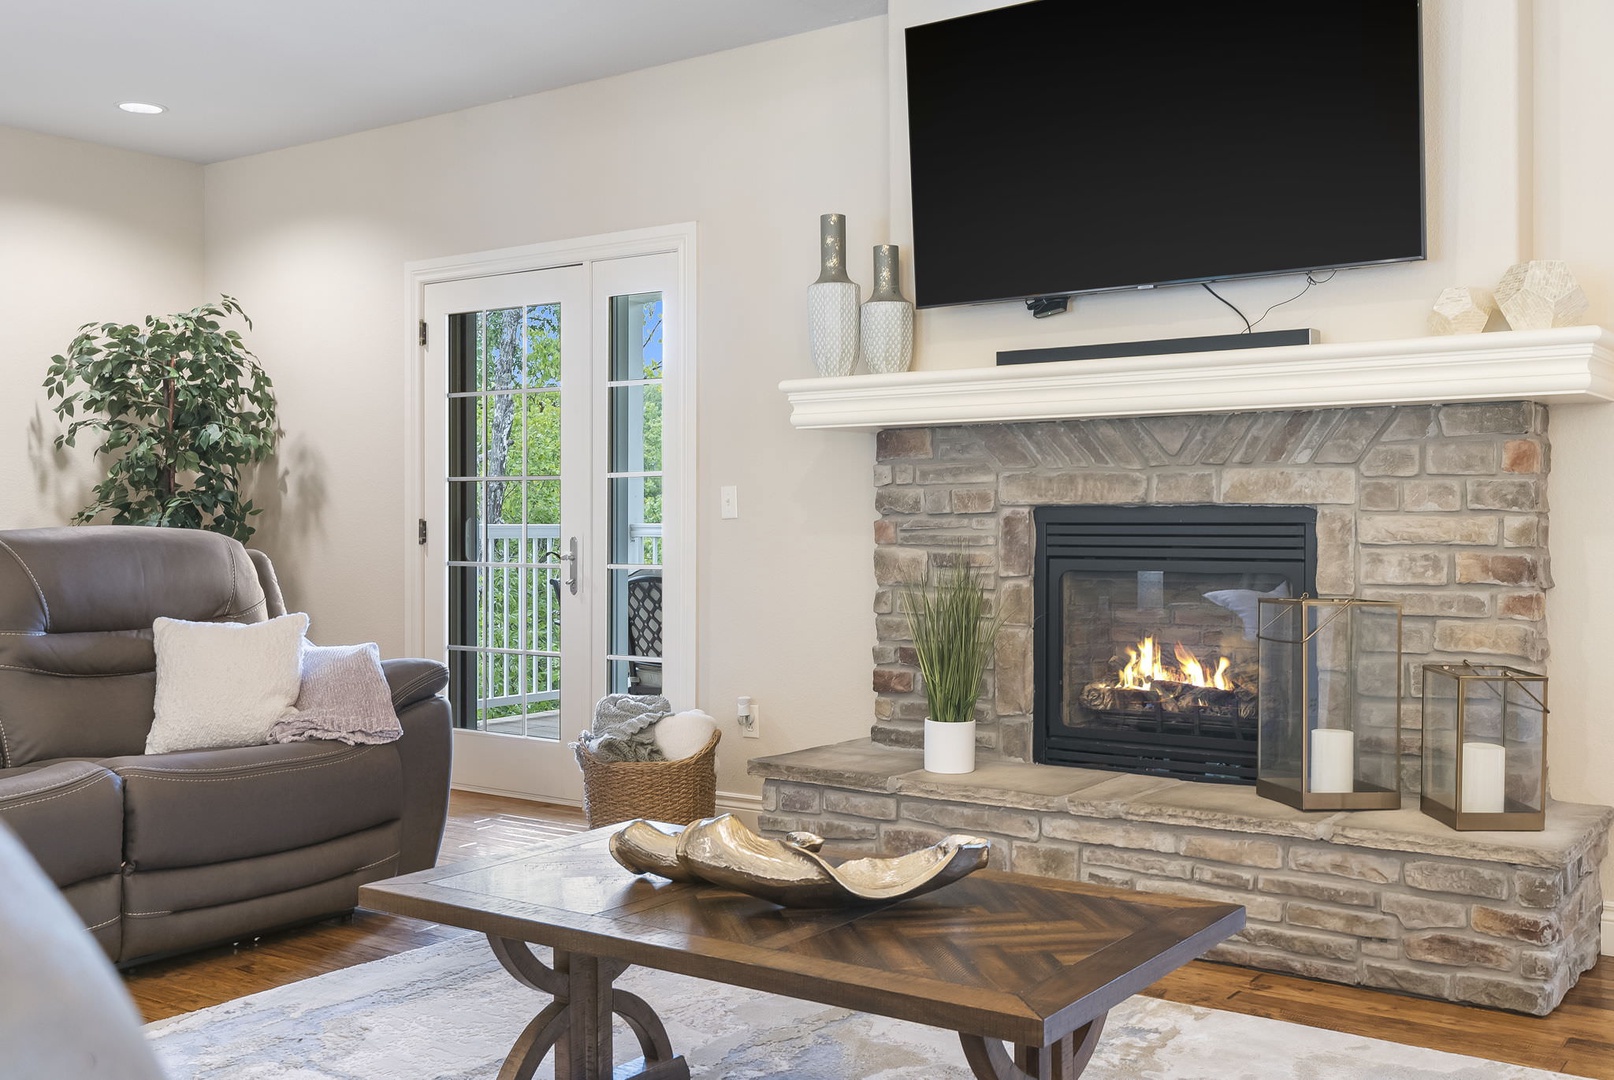 Living room with ample seating, fireplace, Smart TV, and deck access